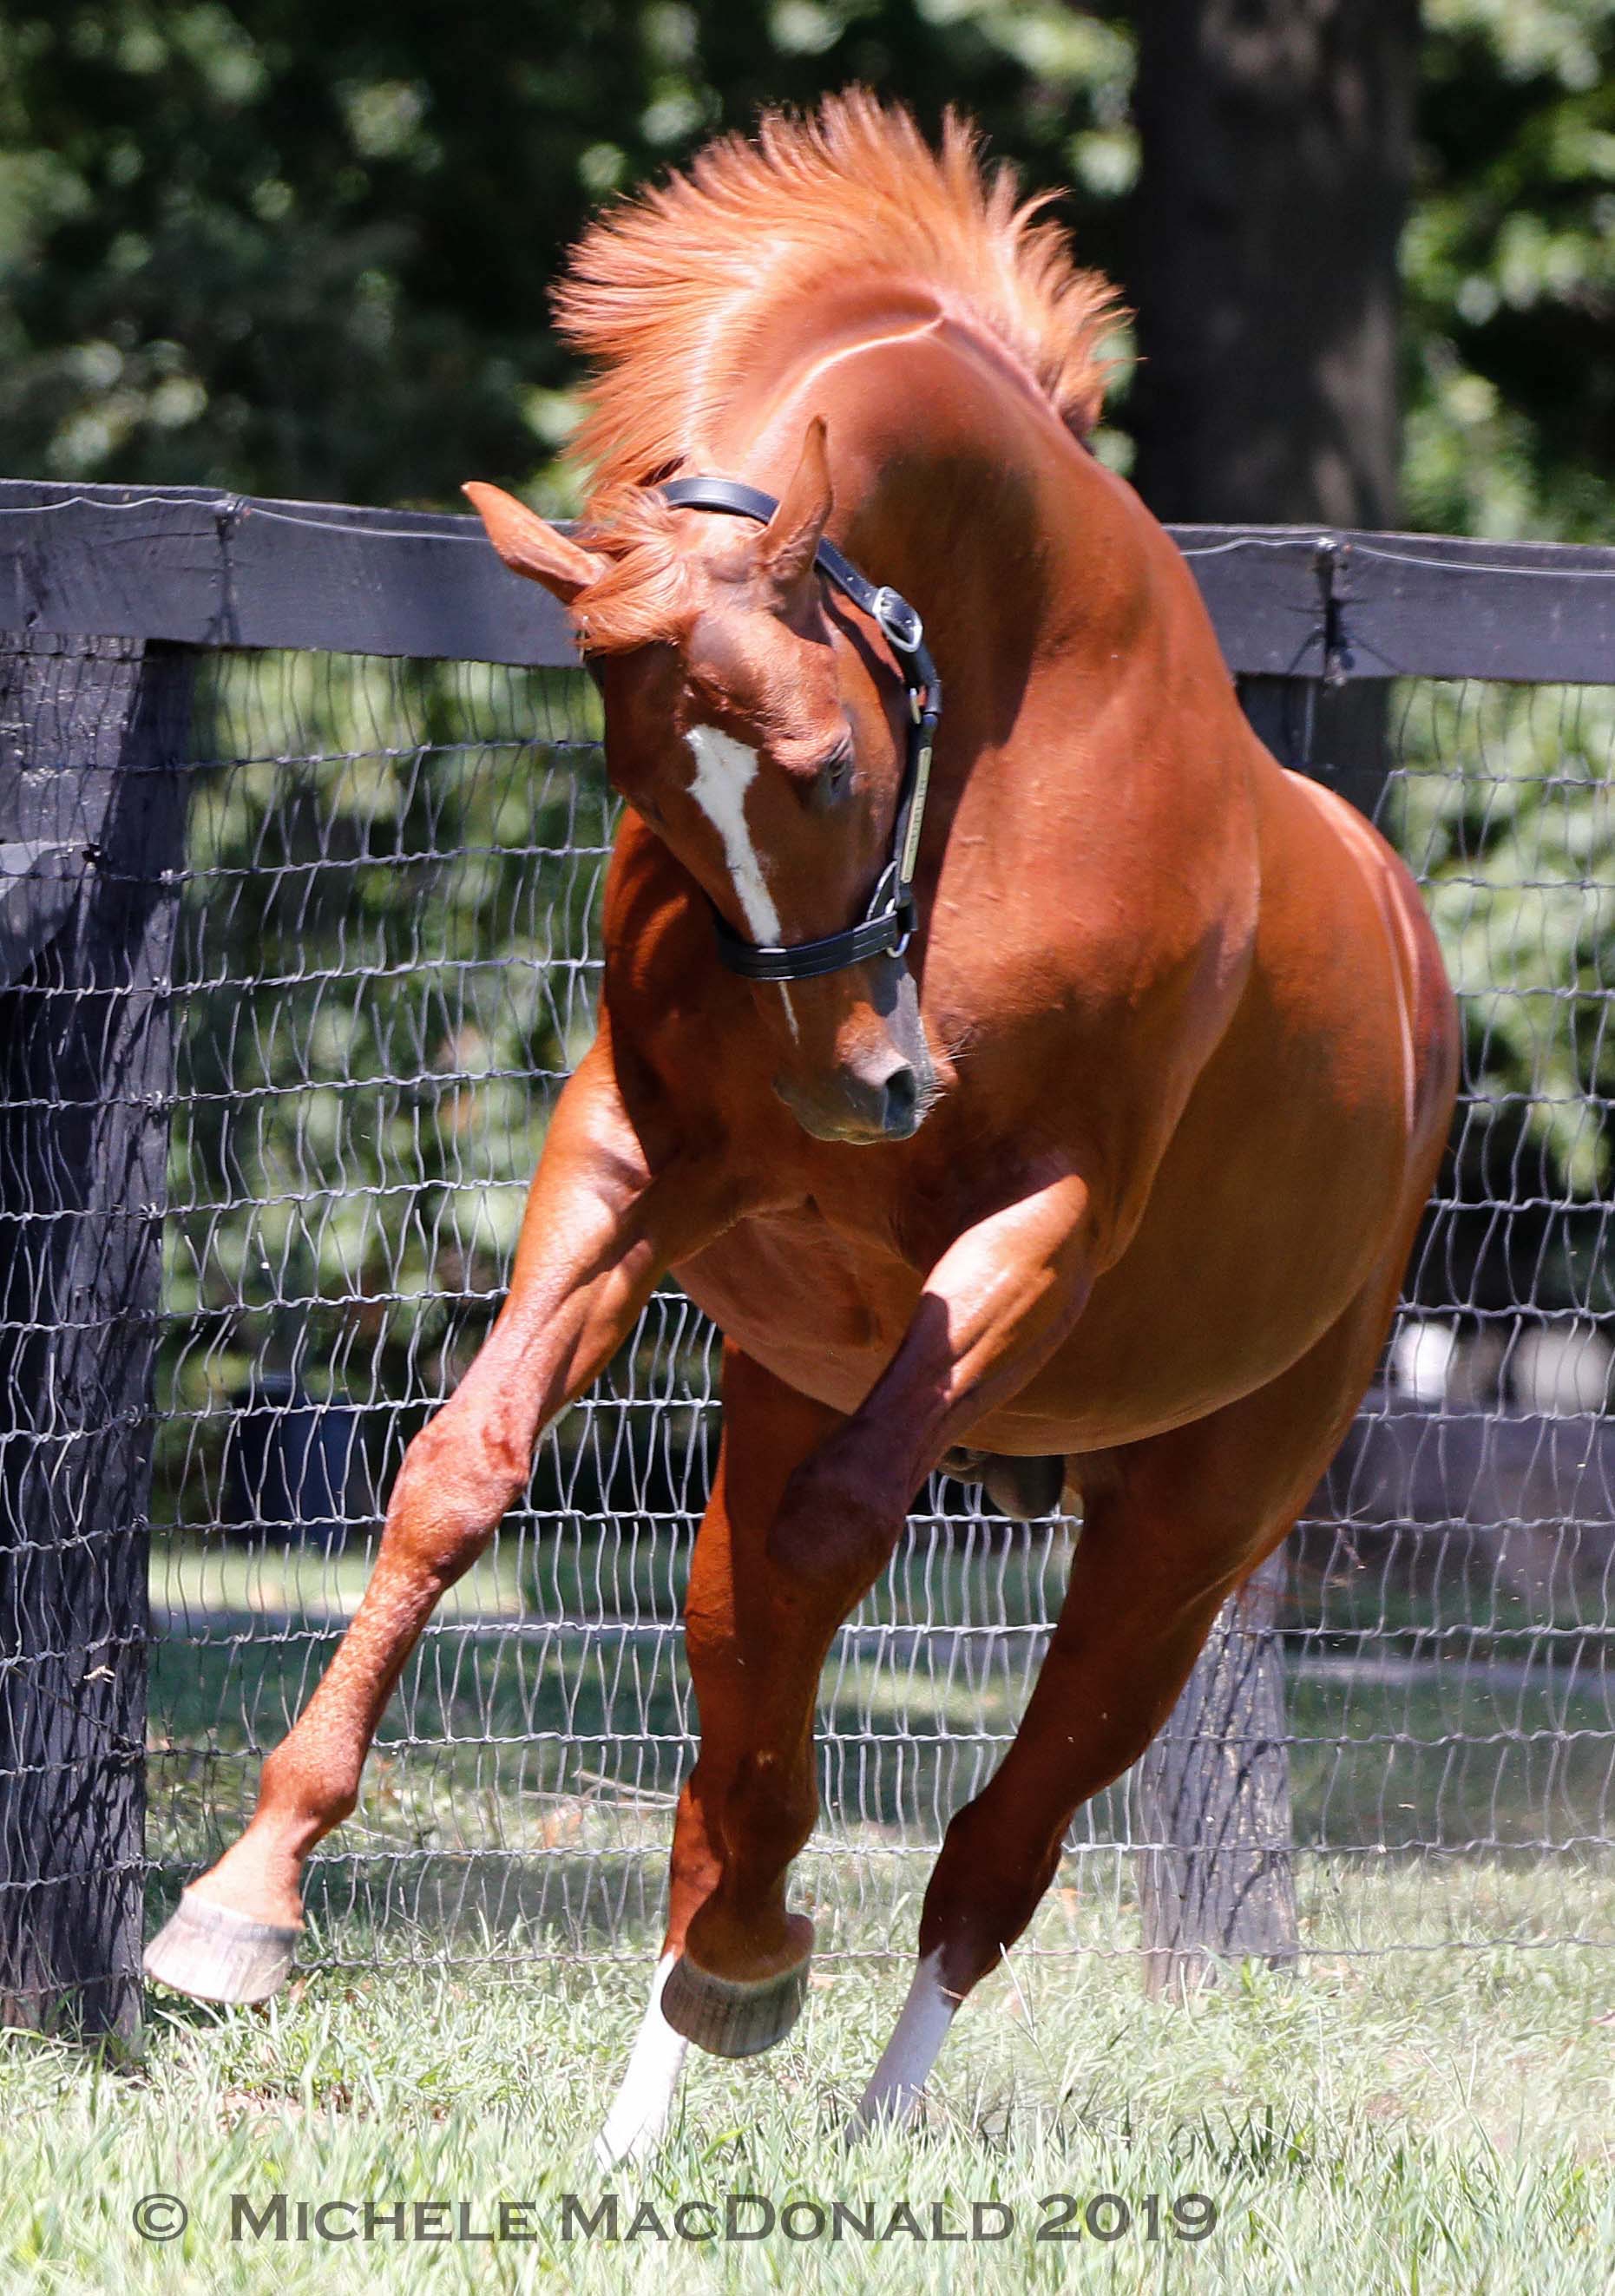 Playful mood: “Some days [Curlin will] stand there like a statue and not move, and then some days he’ll sidestep and he just doesn’t want to stand still. You really can’t do much about it,” says stallion manager Larry Walton. Photo: Michele MacDonald